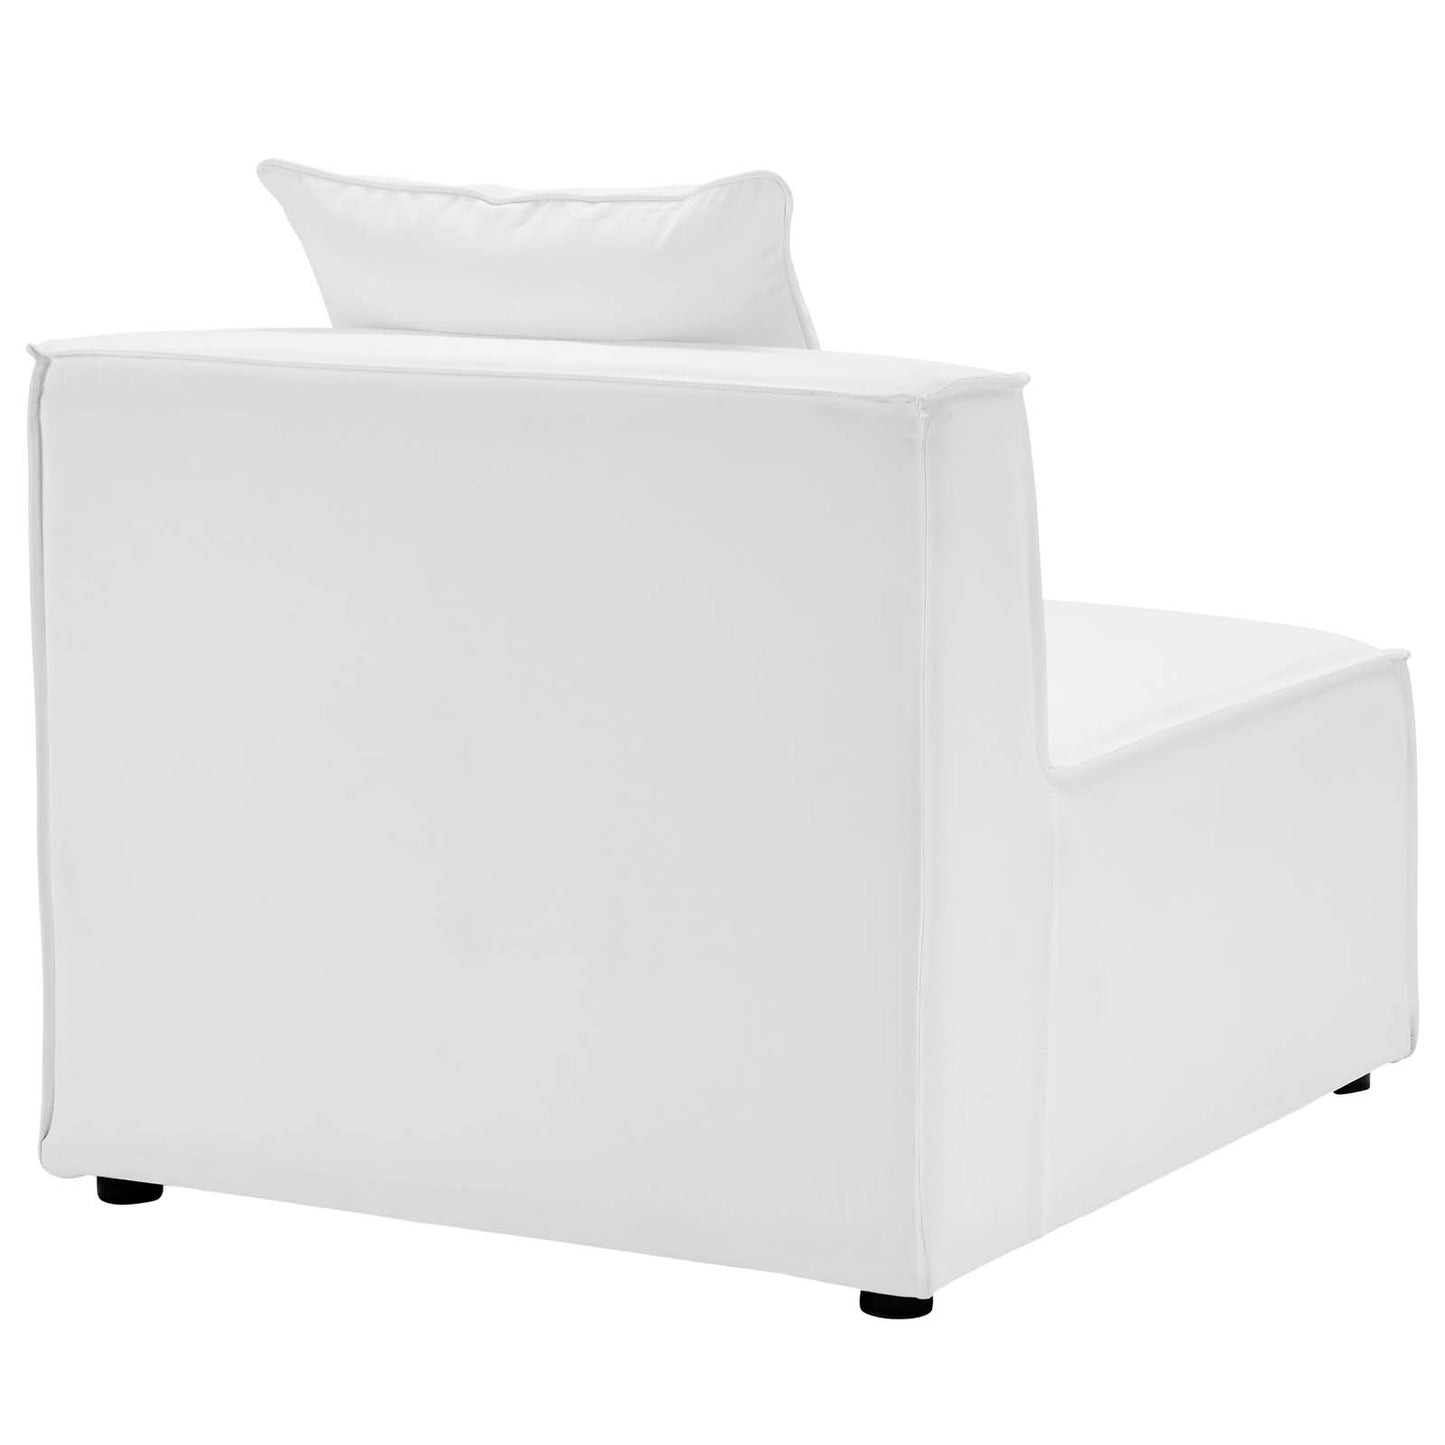 Saybrook Outdoor Patio Upholstered 4-Piece Sectional Sofa White EEI-4380-WHI